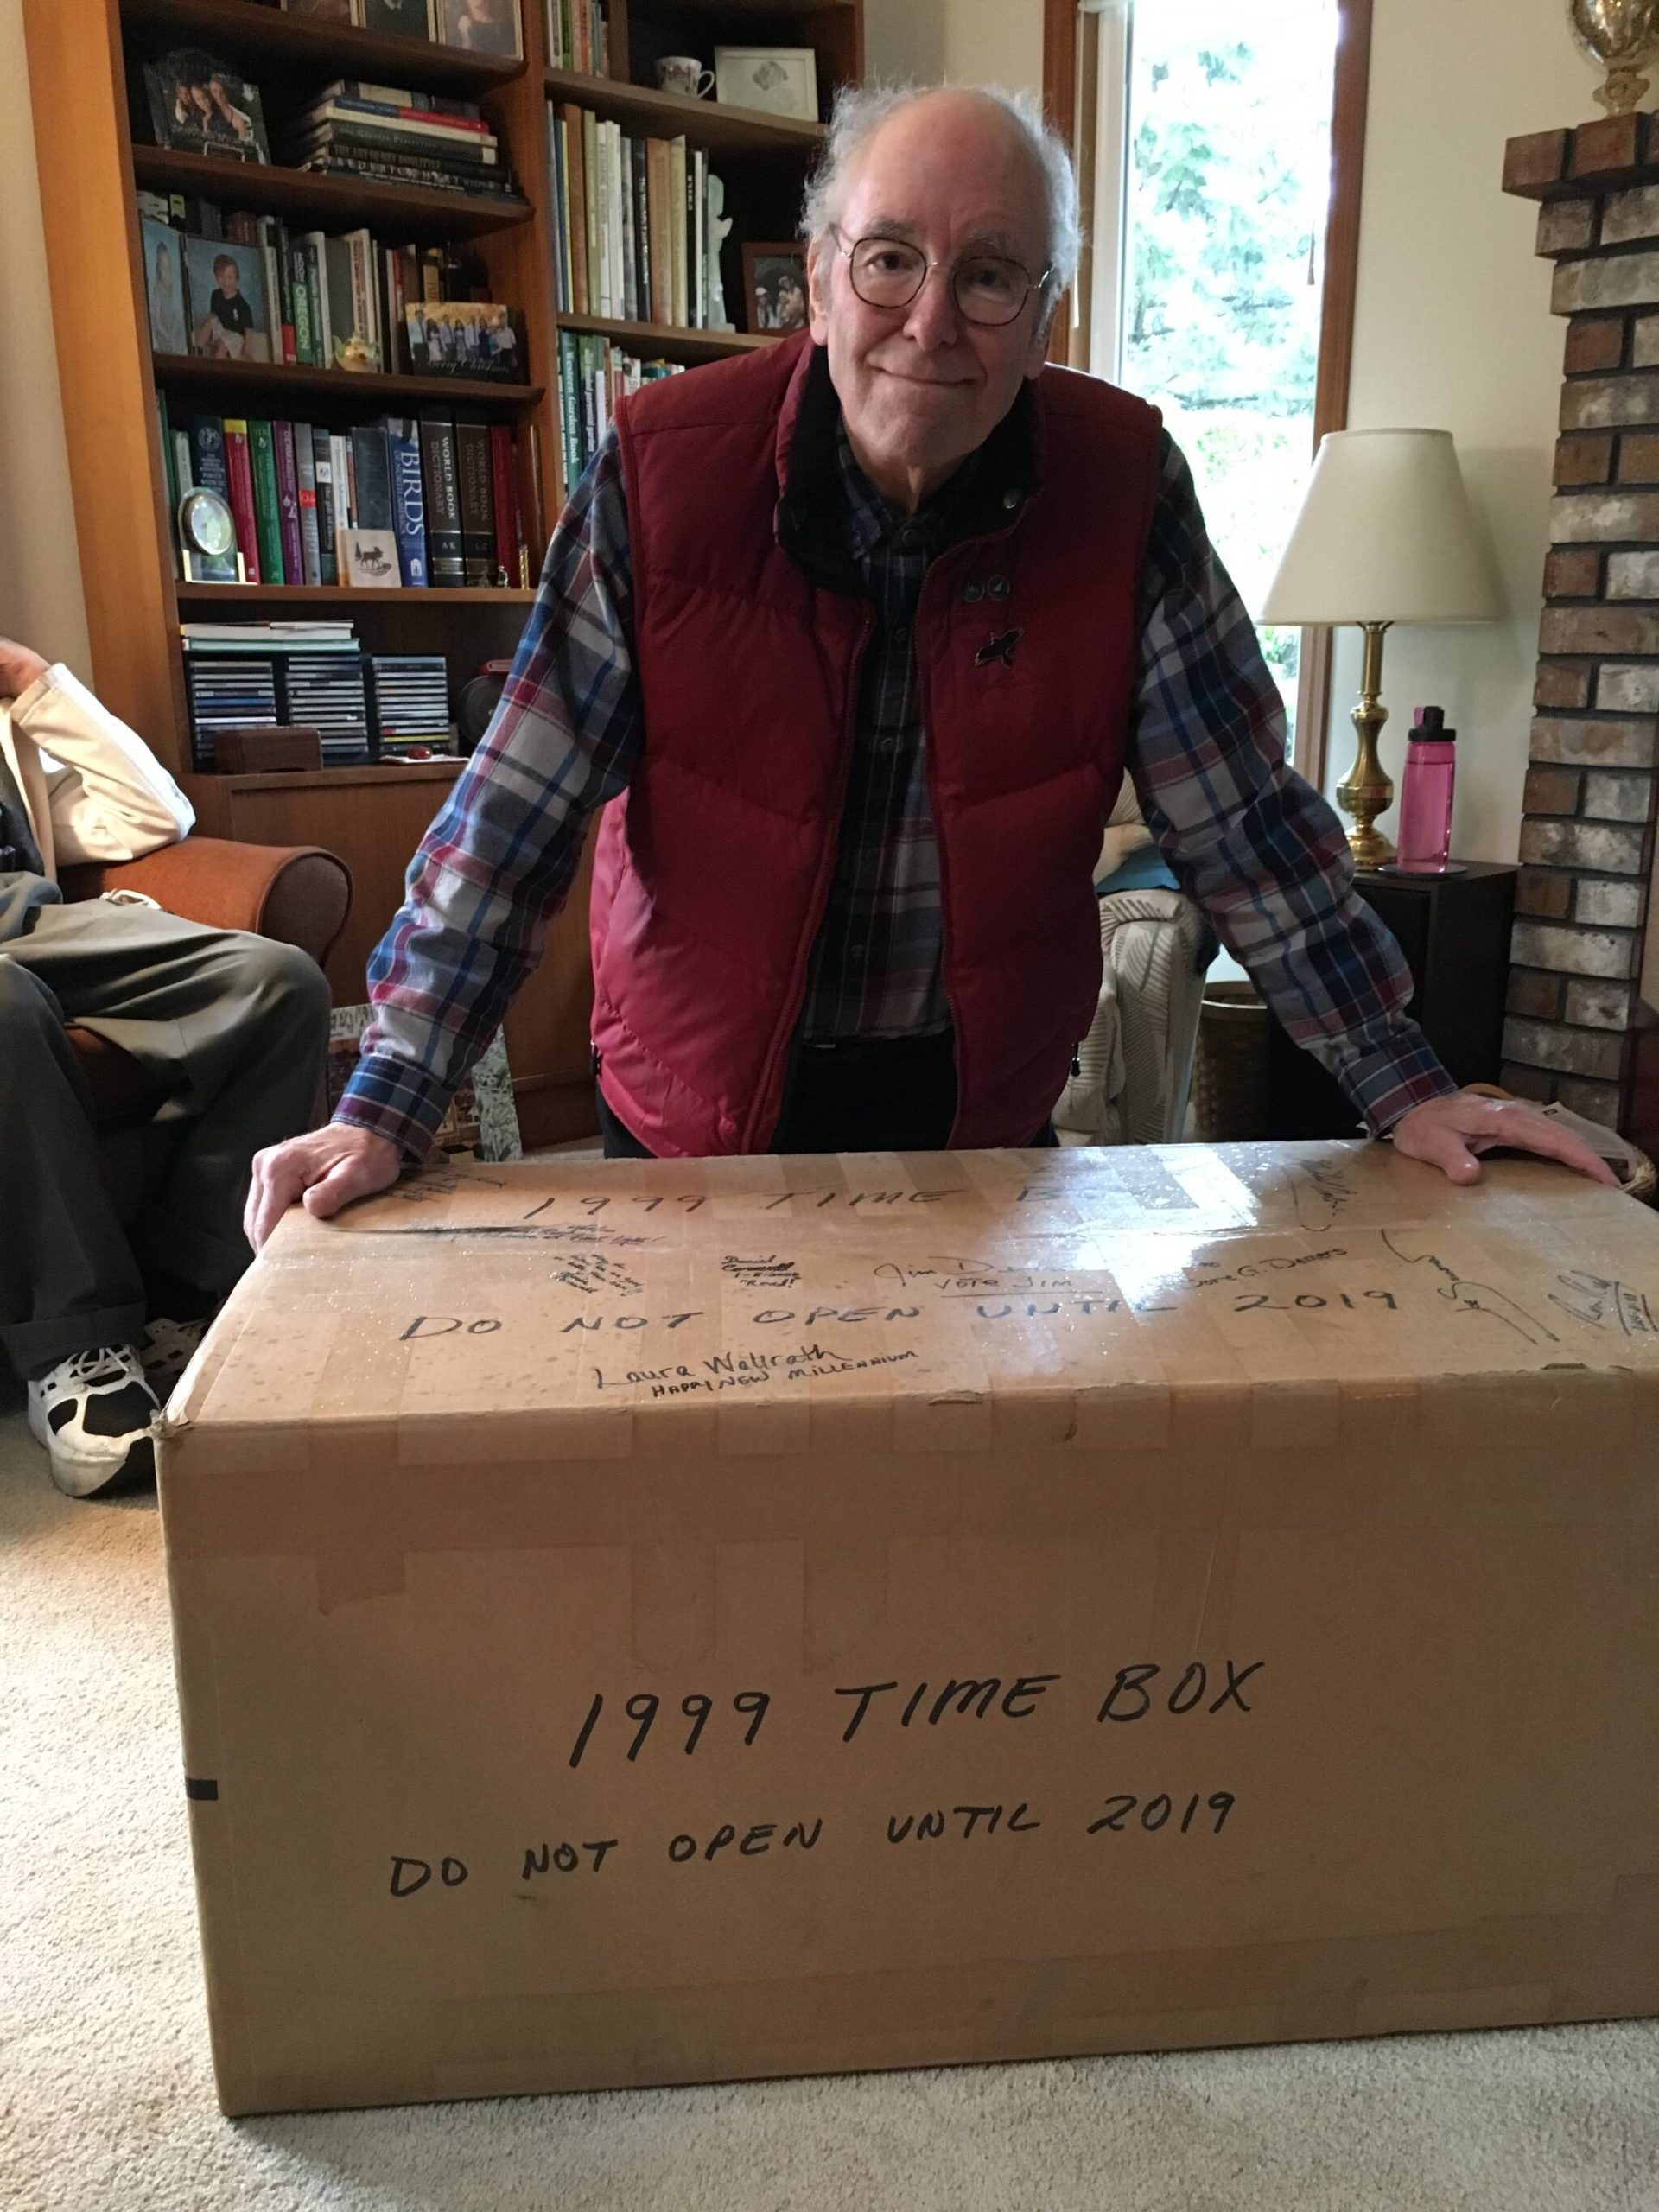 Courtesy Photo / Jonathon Turlove
Michael Orelove poses with one of his many annual 20-year time boxes. In addition to creating his own time capsules, Orelove was responsible for Juneau’s time capsule located at the Hurff A. Saunders Federal Building.